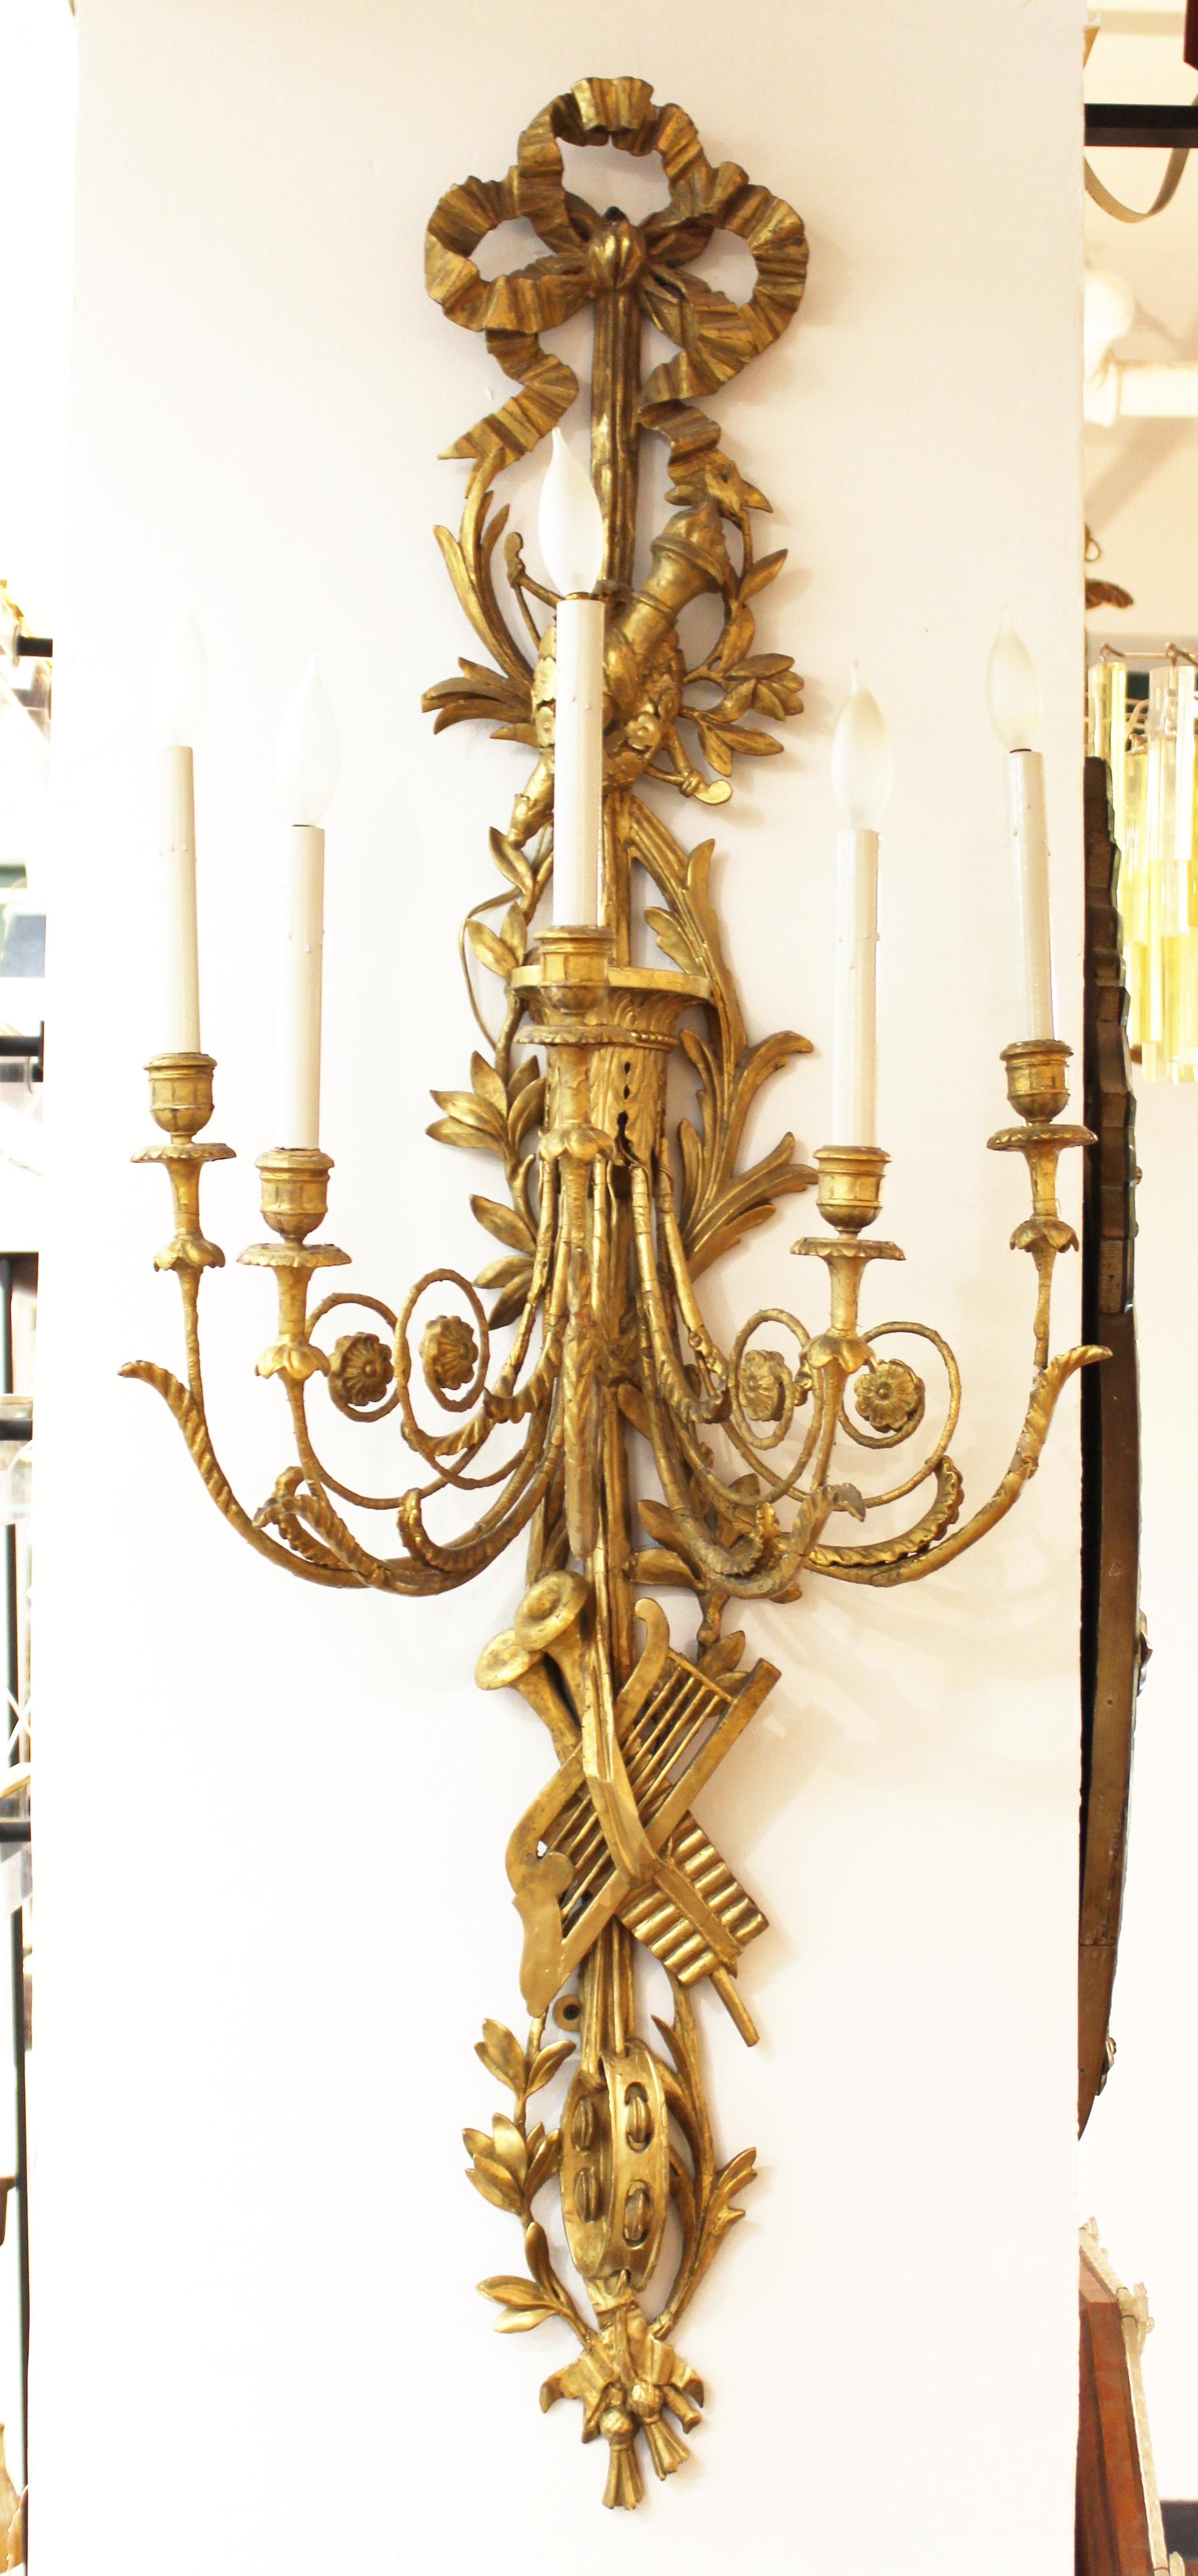 French pair of monumental Louis XVI neoclassical wall sconces. The pair is made of carved and gilt wood and has been electrified. Decorative carved trophies and musical arts elements adorn the upper and lower sections. The pair is mirrored and in